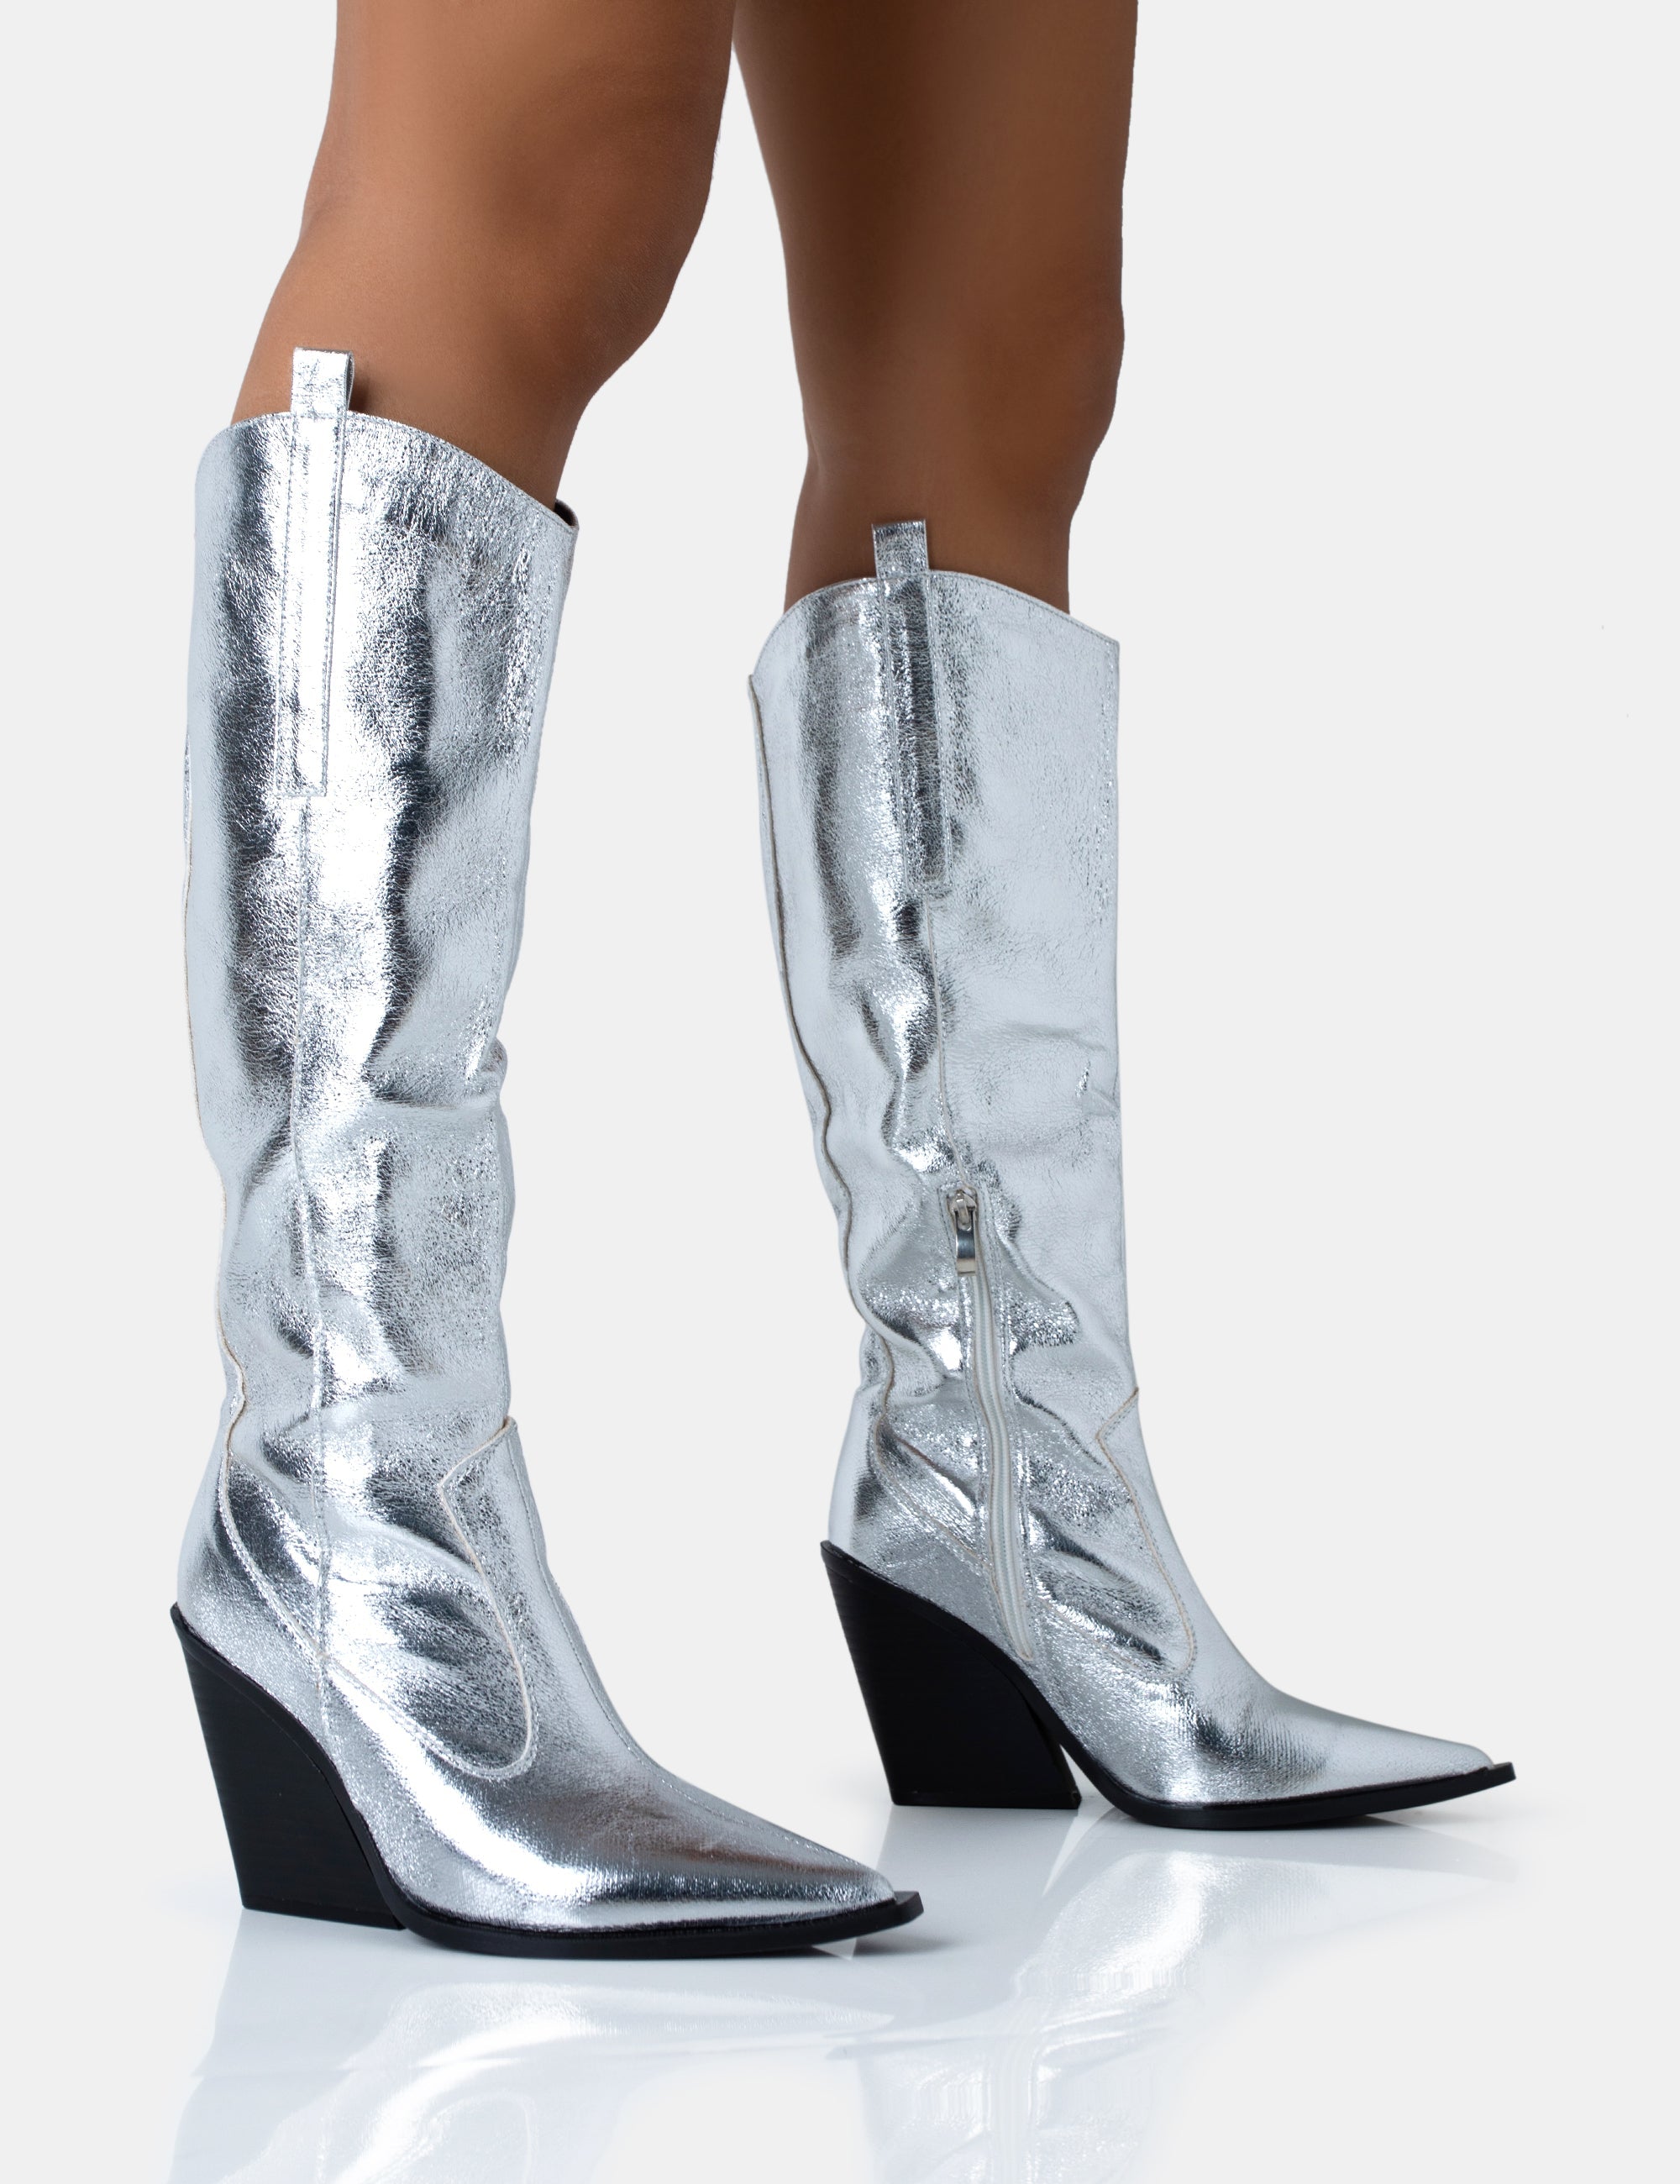 Women's Silver Metallic Western Pointed Wedge Heeled Knee Boots - Size 9